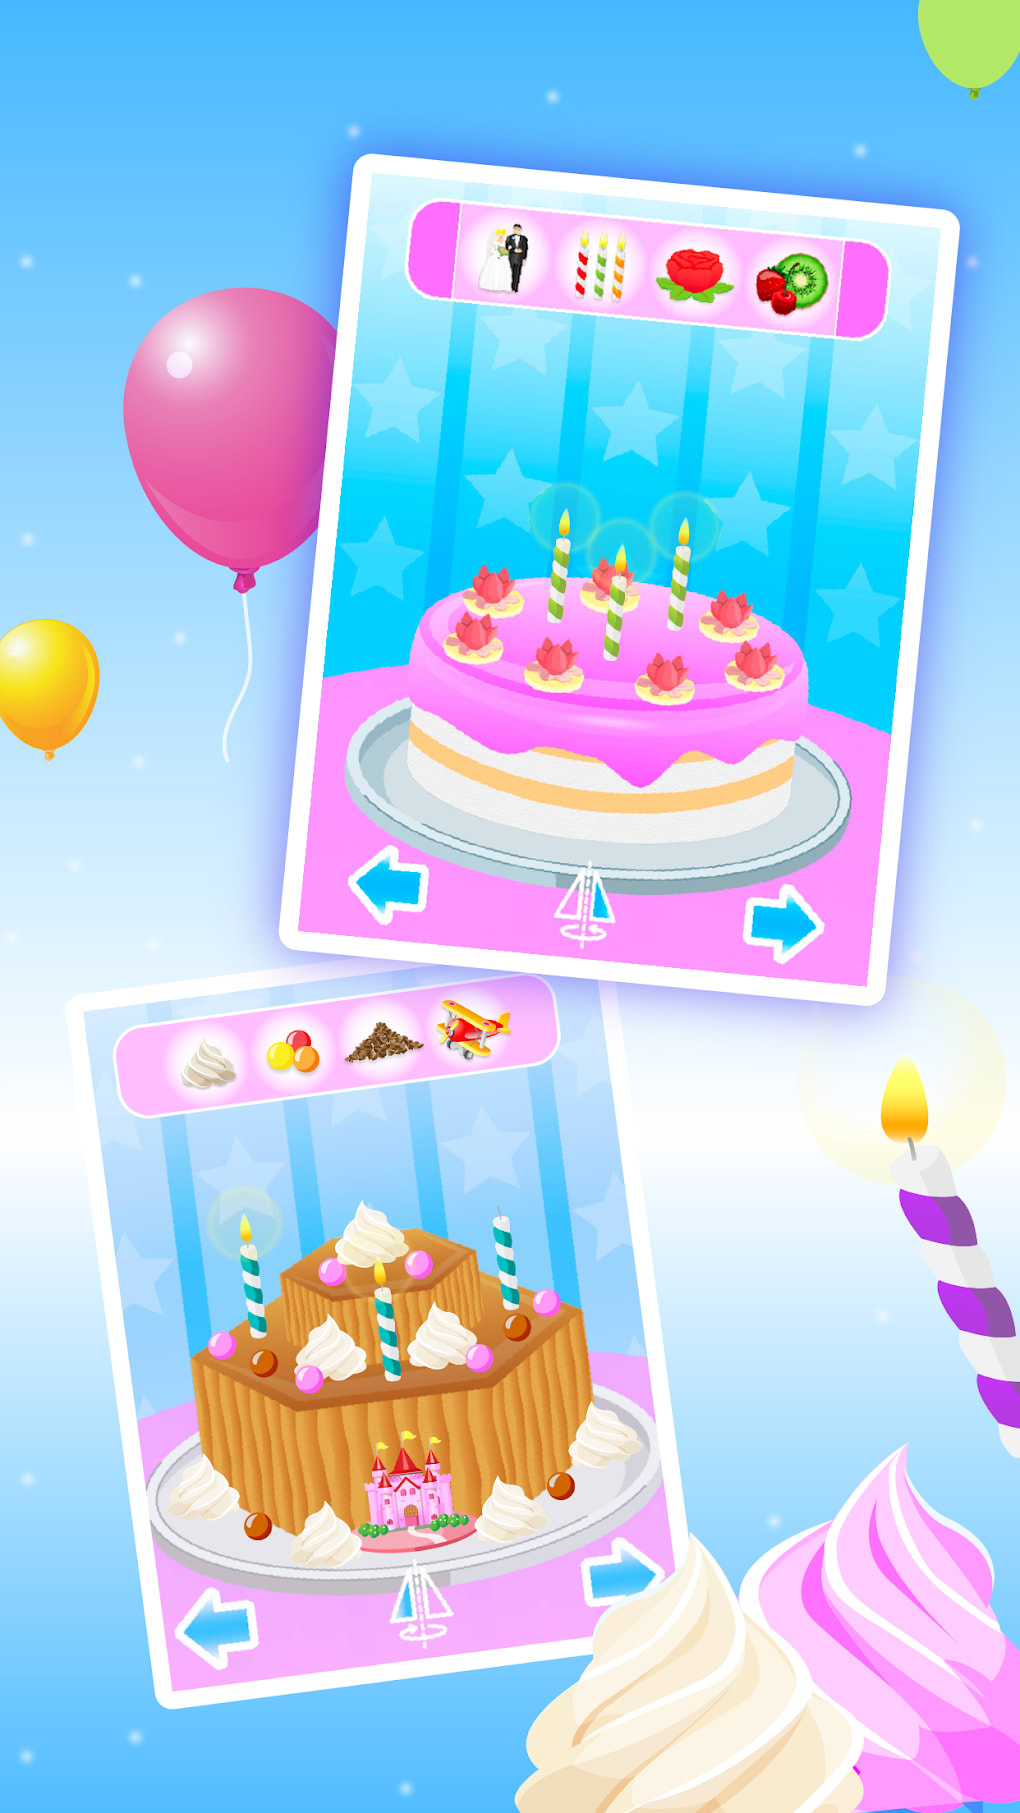 Cake Maker - Cooking Game - Apps on Google Play